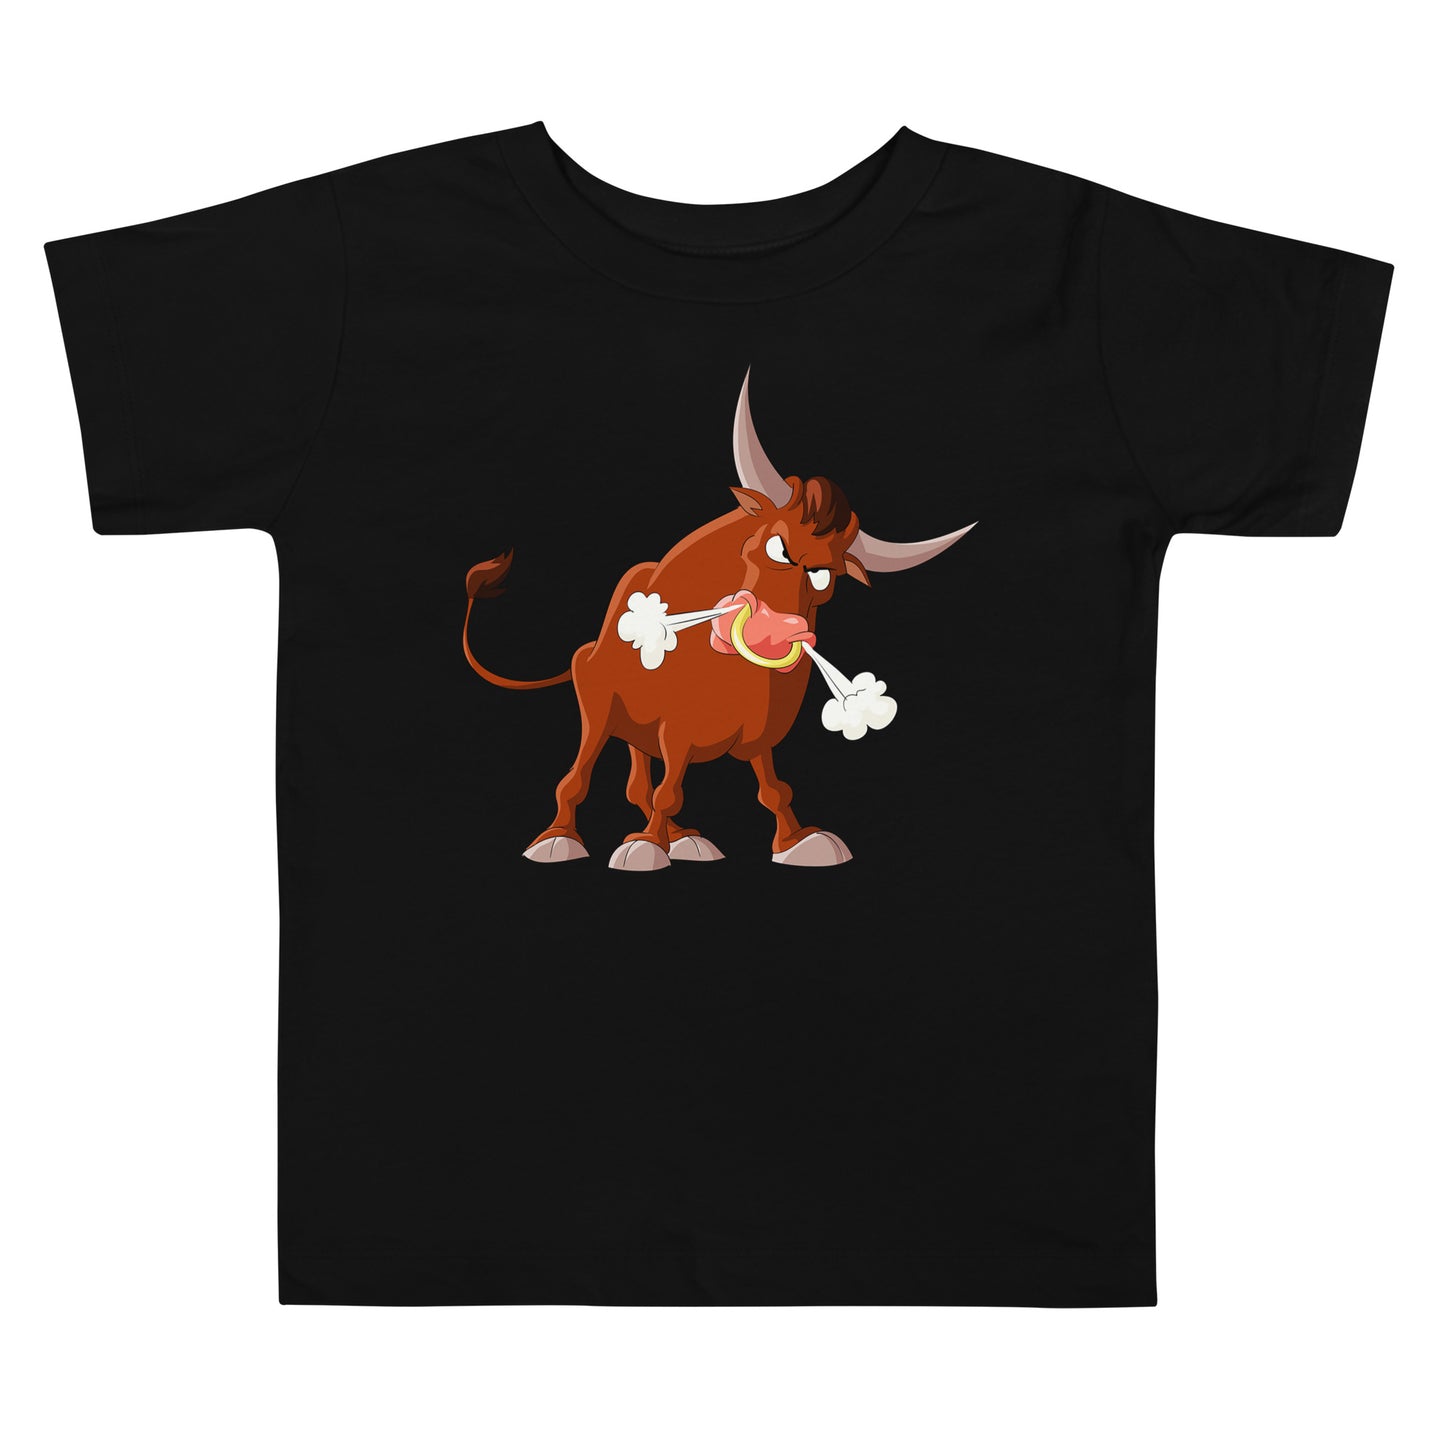 Black toddler t-shirt with bull